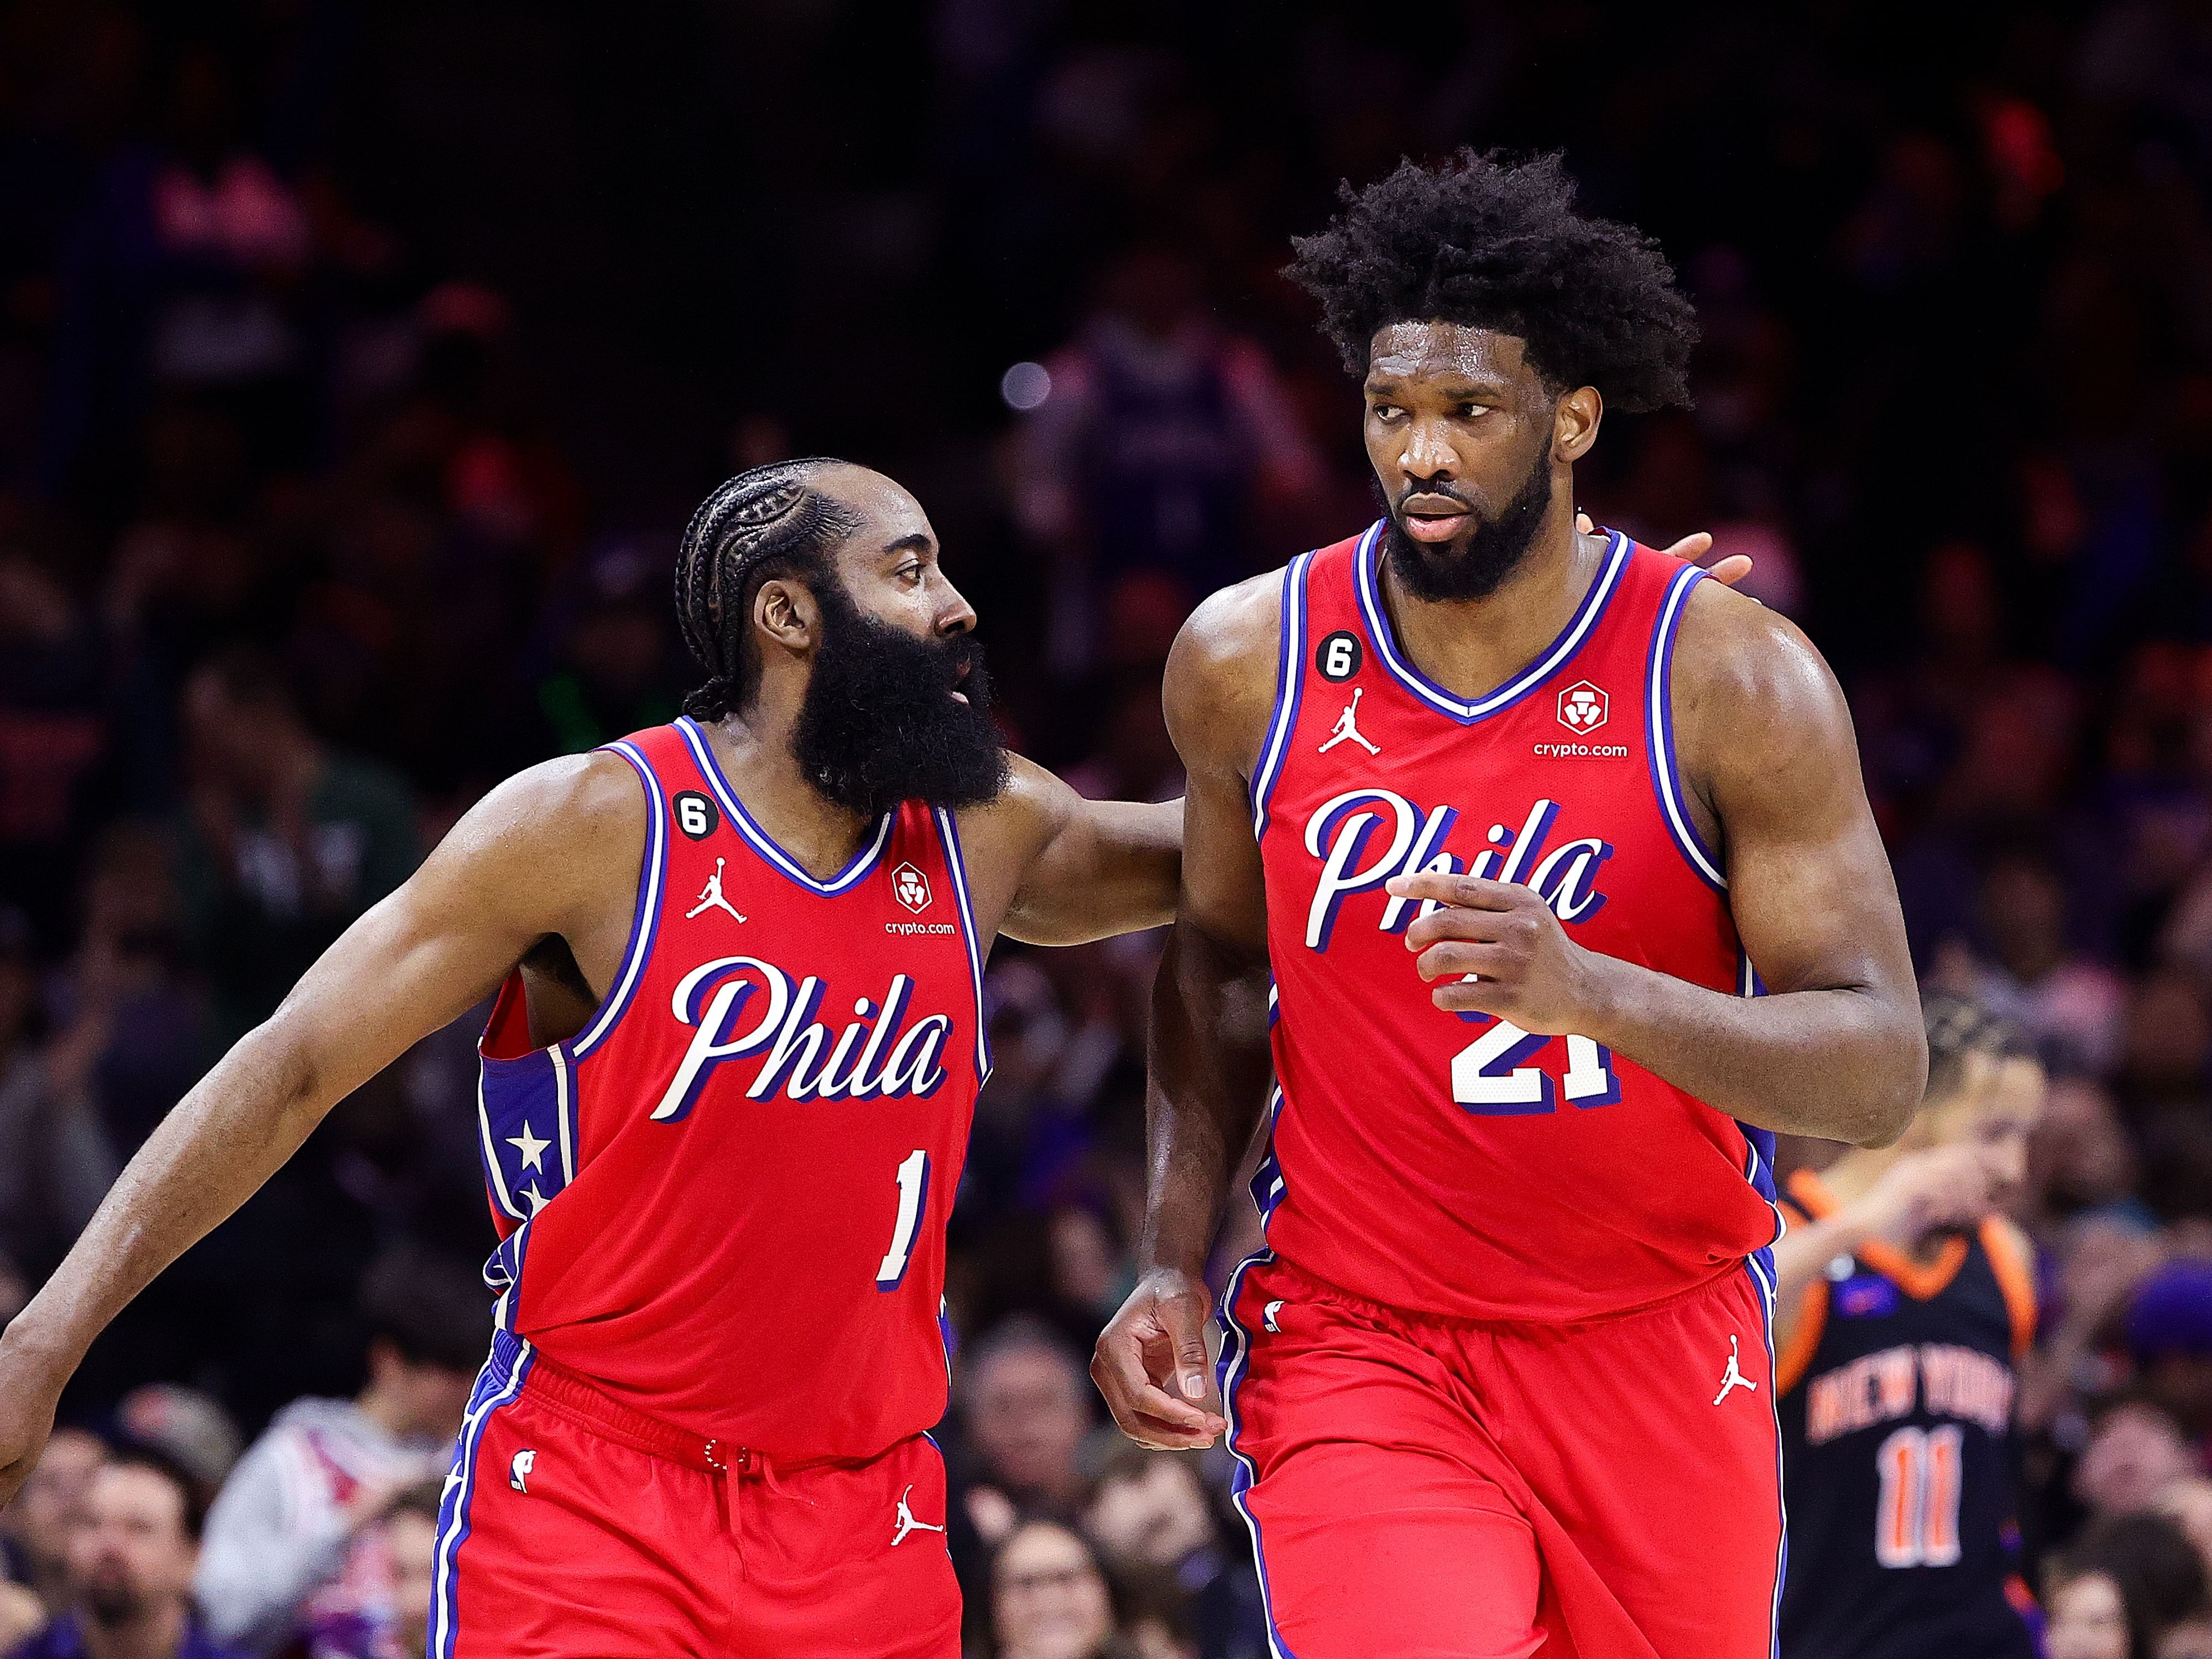 Sixers Notebook: Joel Embiid determined to win with or without James Harden